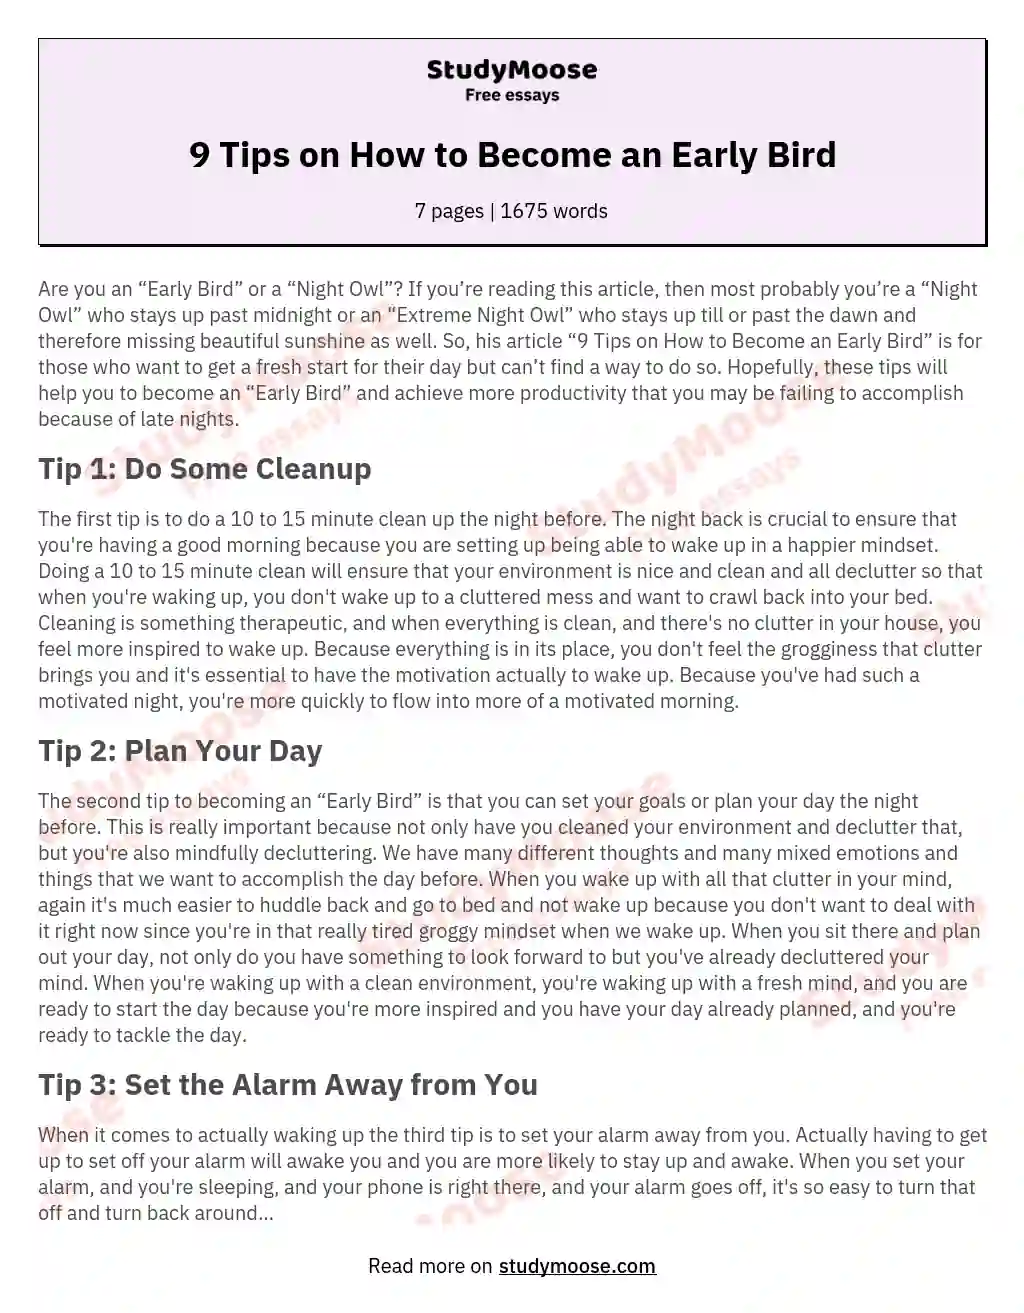 9 Tips on How to Become an Early Bird